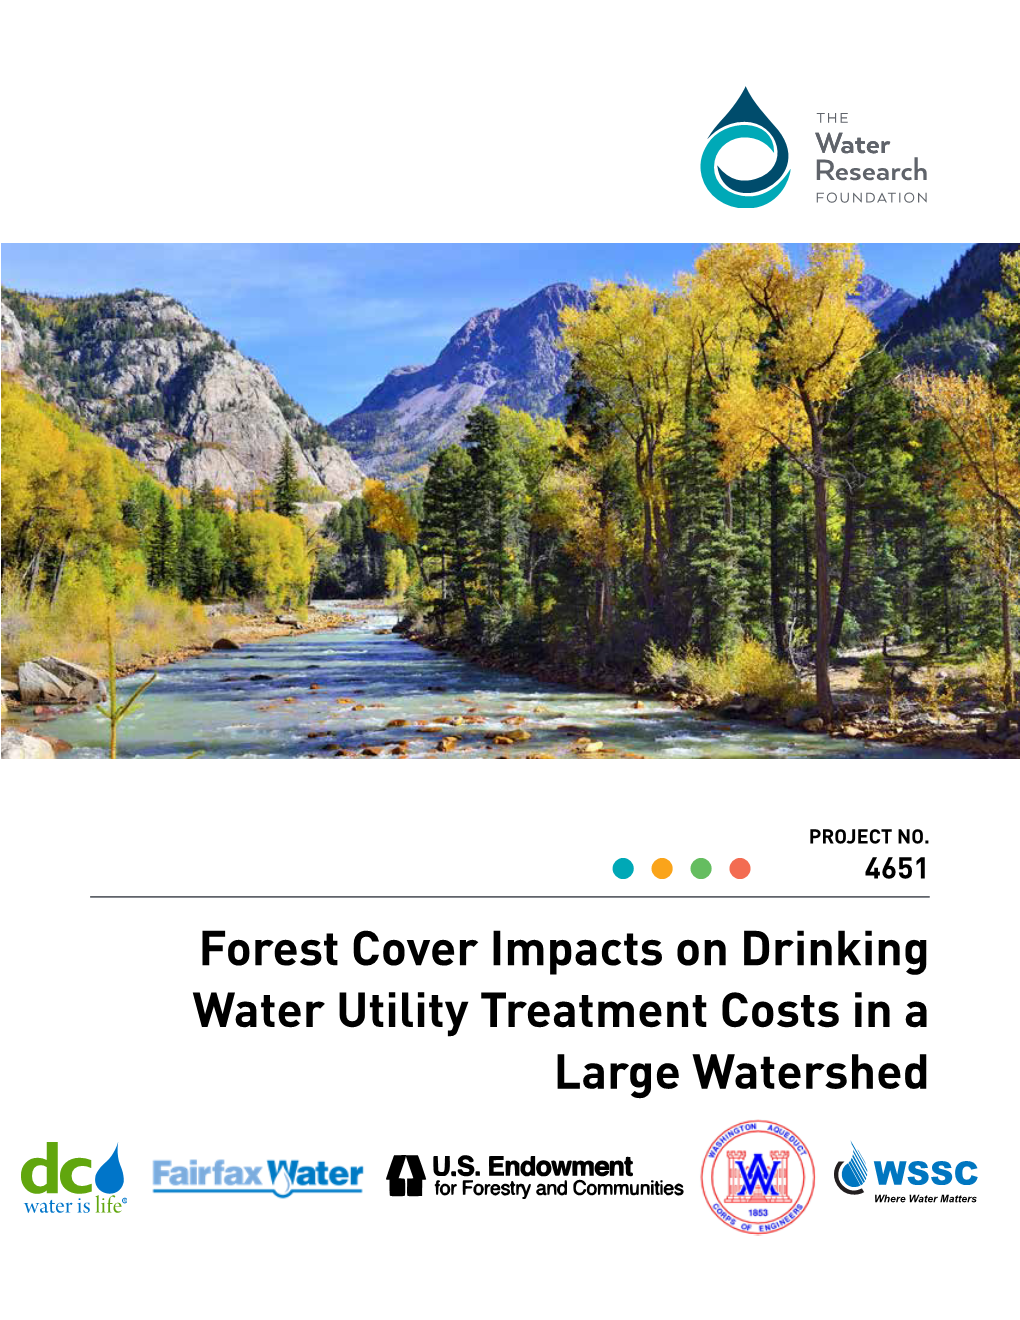 Forest Cover Impacts on Drinking Water Utility Treatment Costs in a Large Watershed